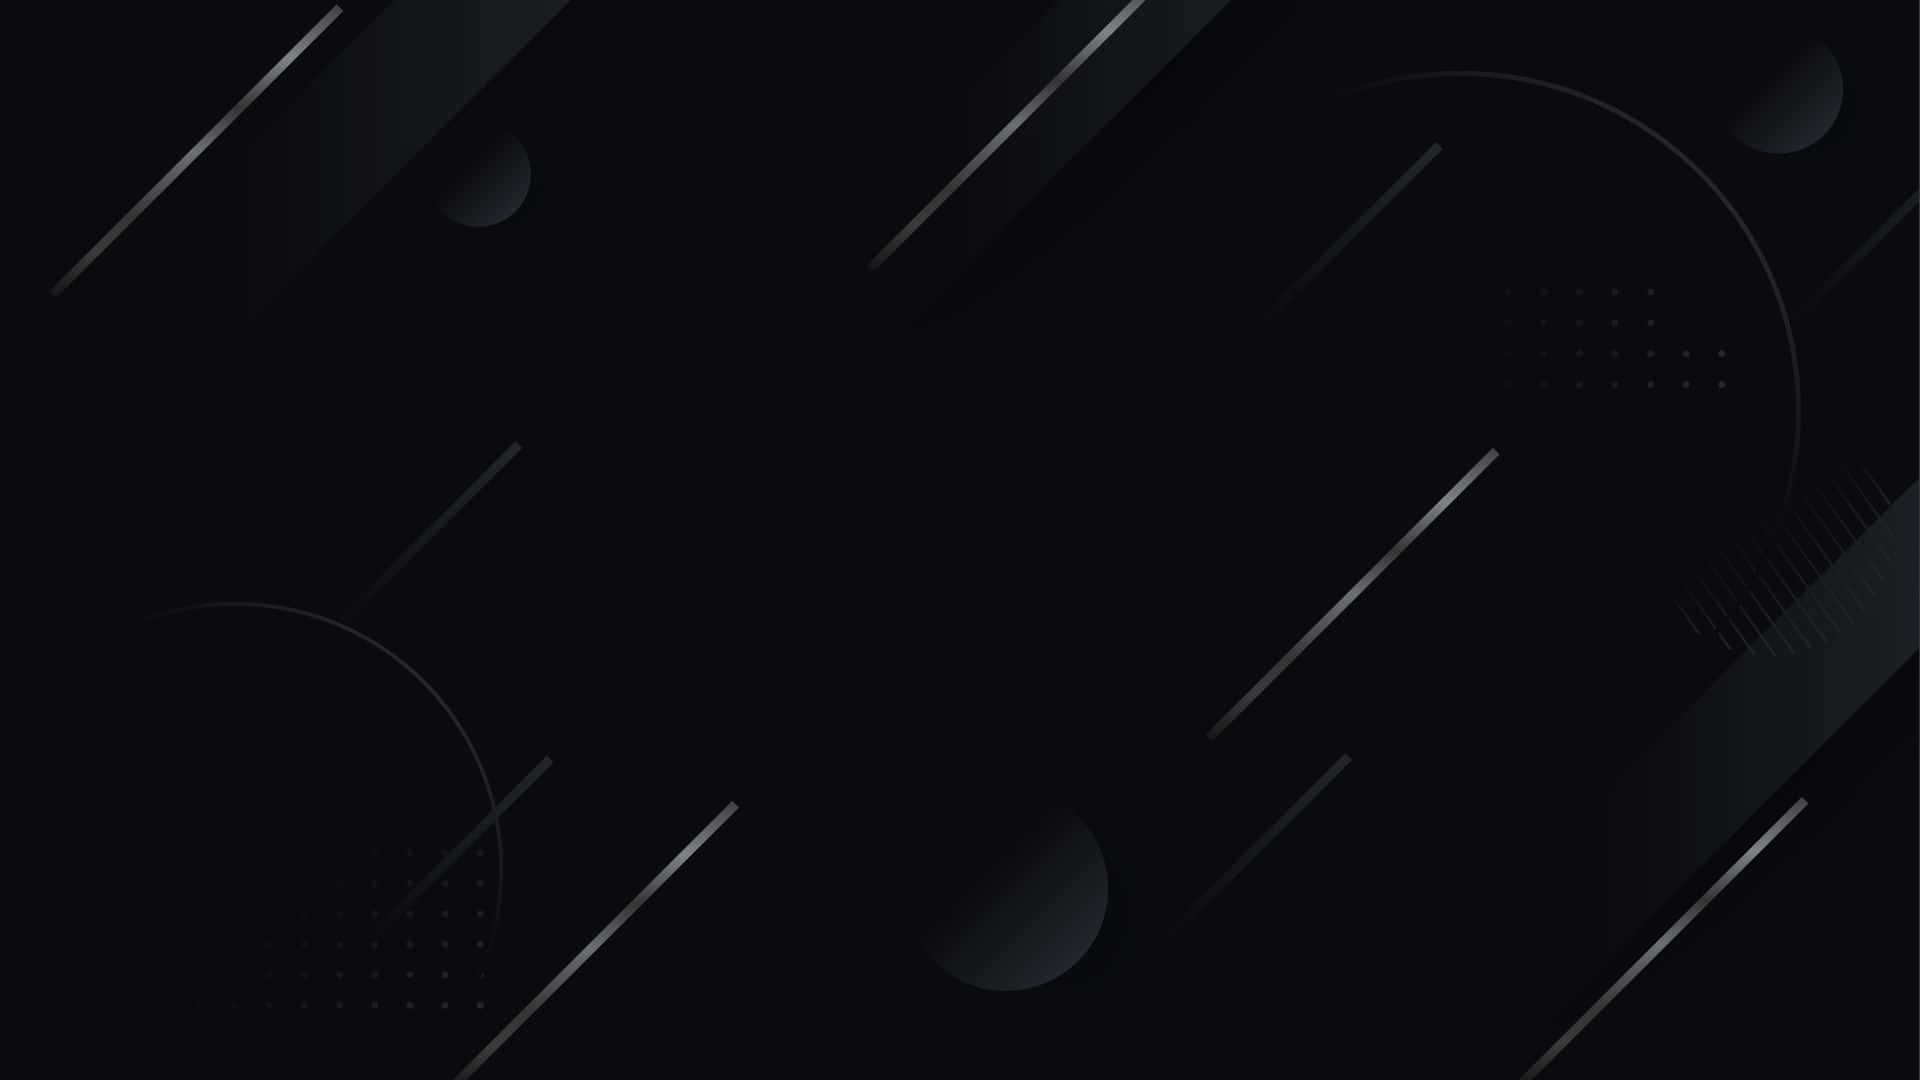 Invisible Circles And Lines Design Black Background